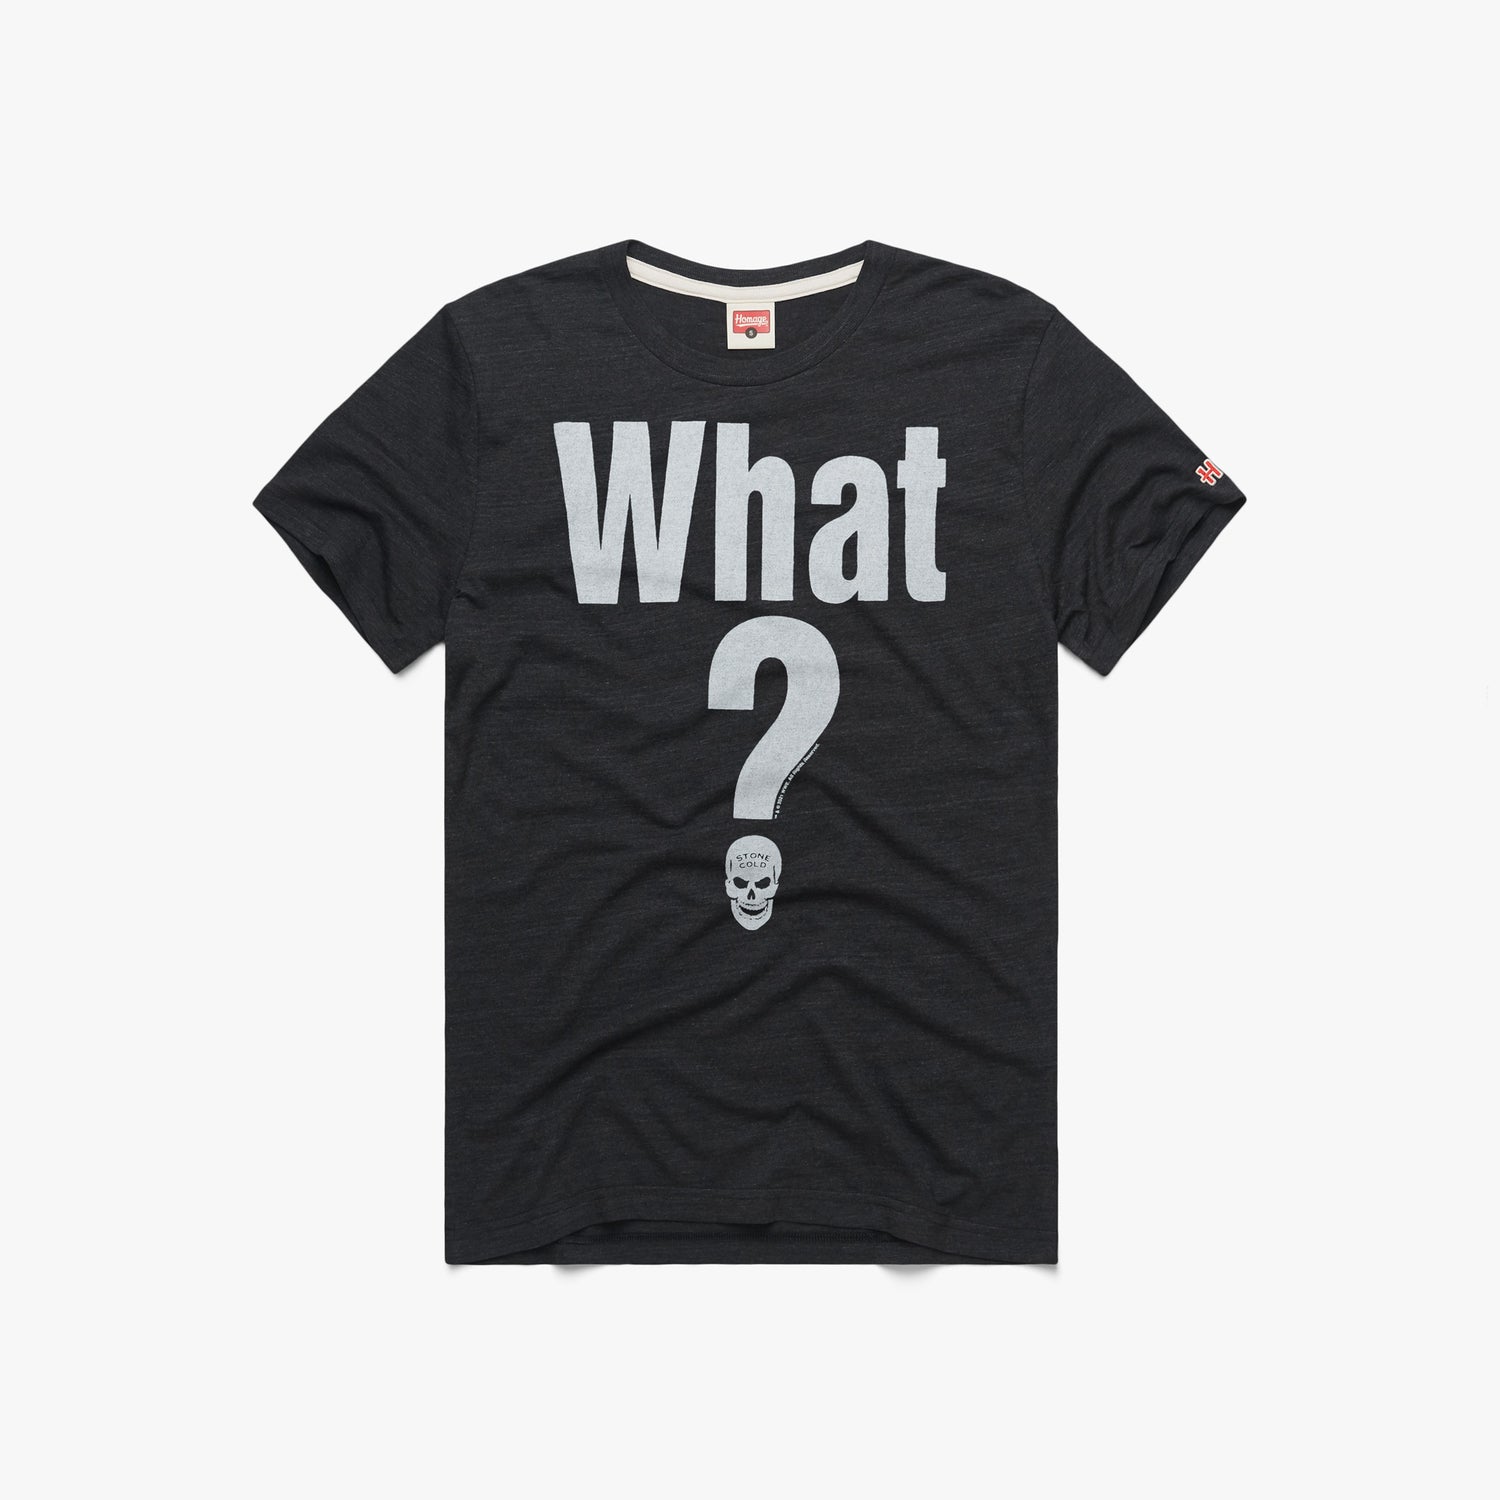 Stone Cold Steve Austin What? T-Shirt from Homage | Grey | Vintage WWE Apparel from Homage.